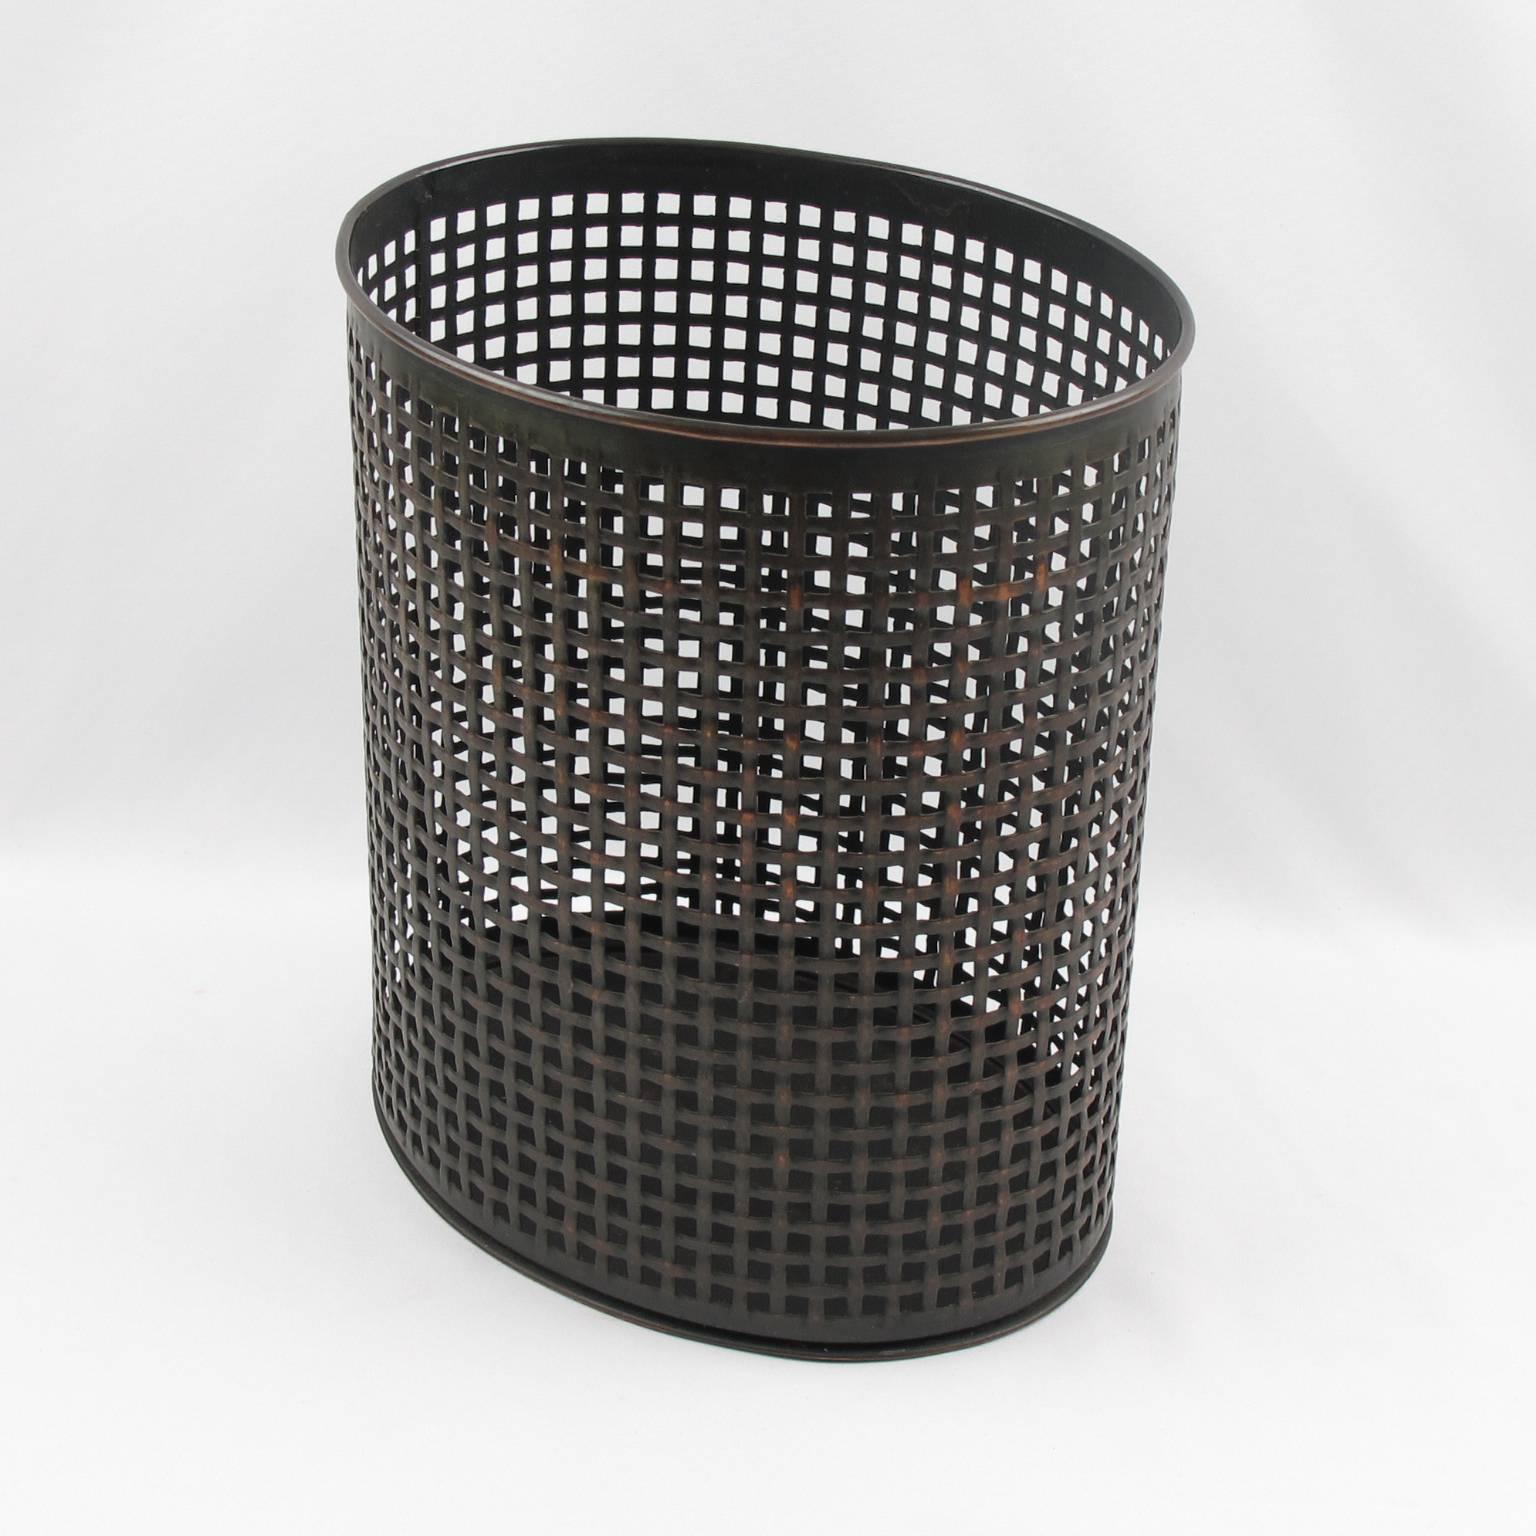 Vintage Mid-Century Modernist perforated metal industrial desk accessory waste basket in the manner of Mathieu Mategot. A striking example of French 1950s metalwork. Folded, perforated metal with plaiting pattern. Fine original condition with dark